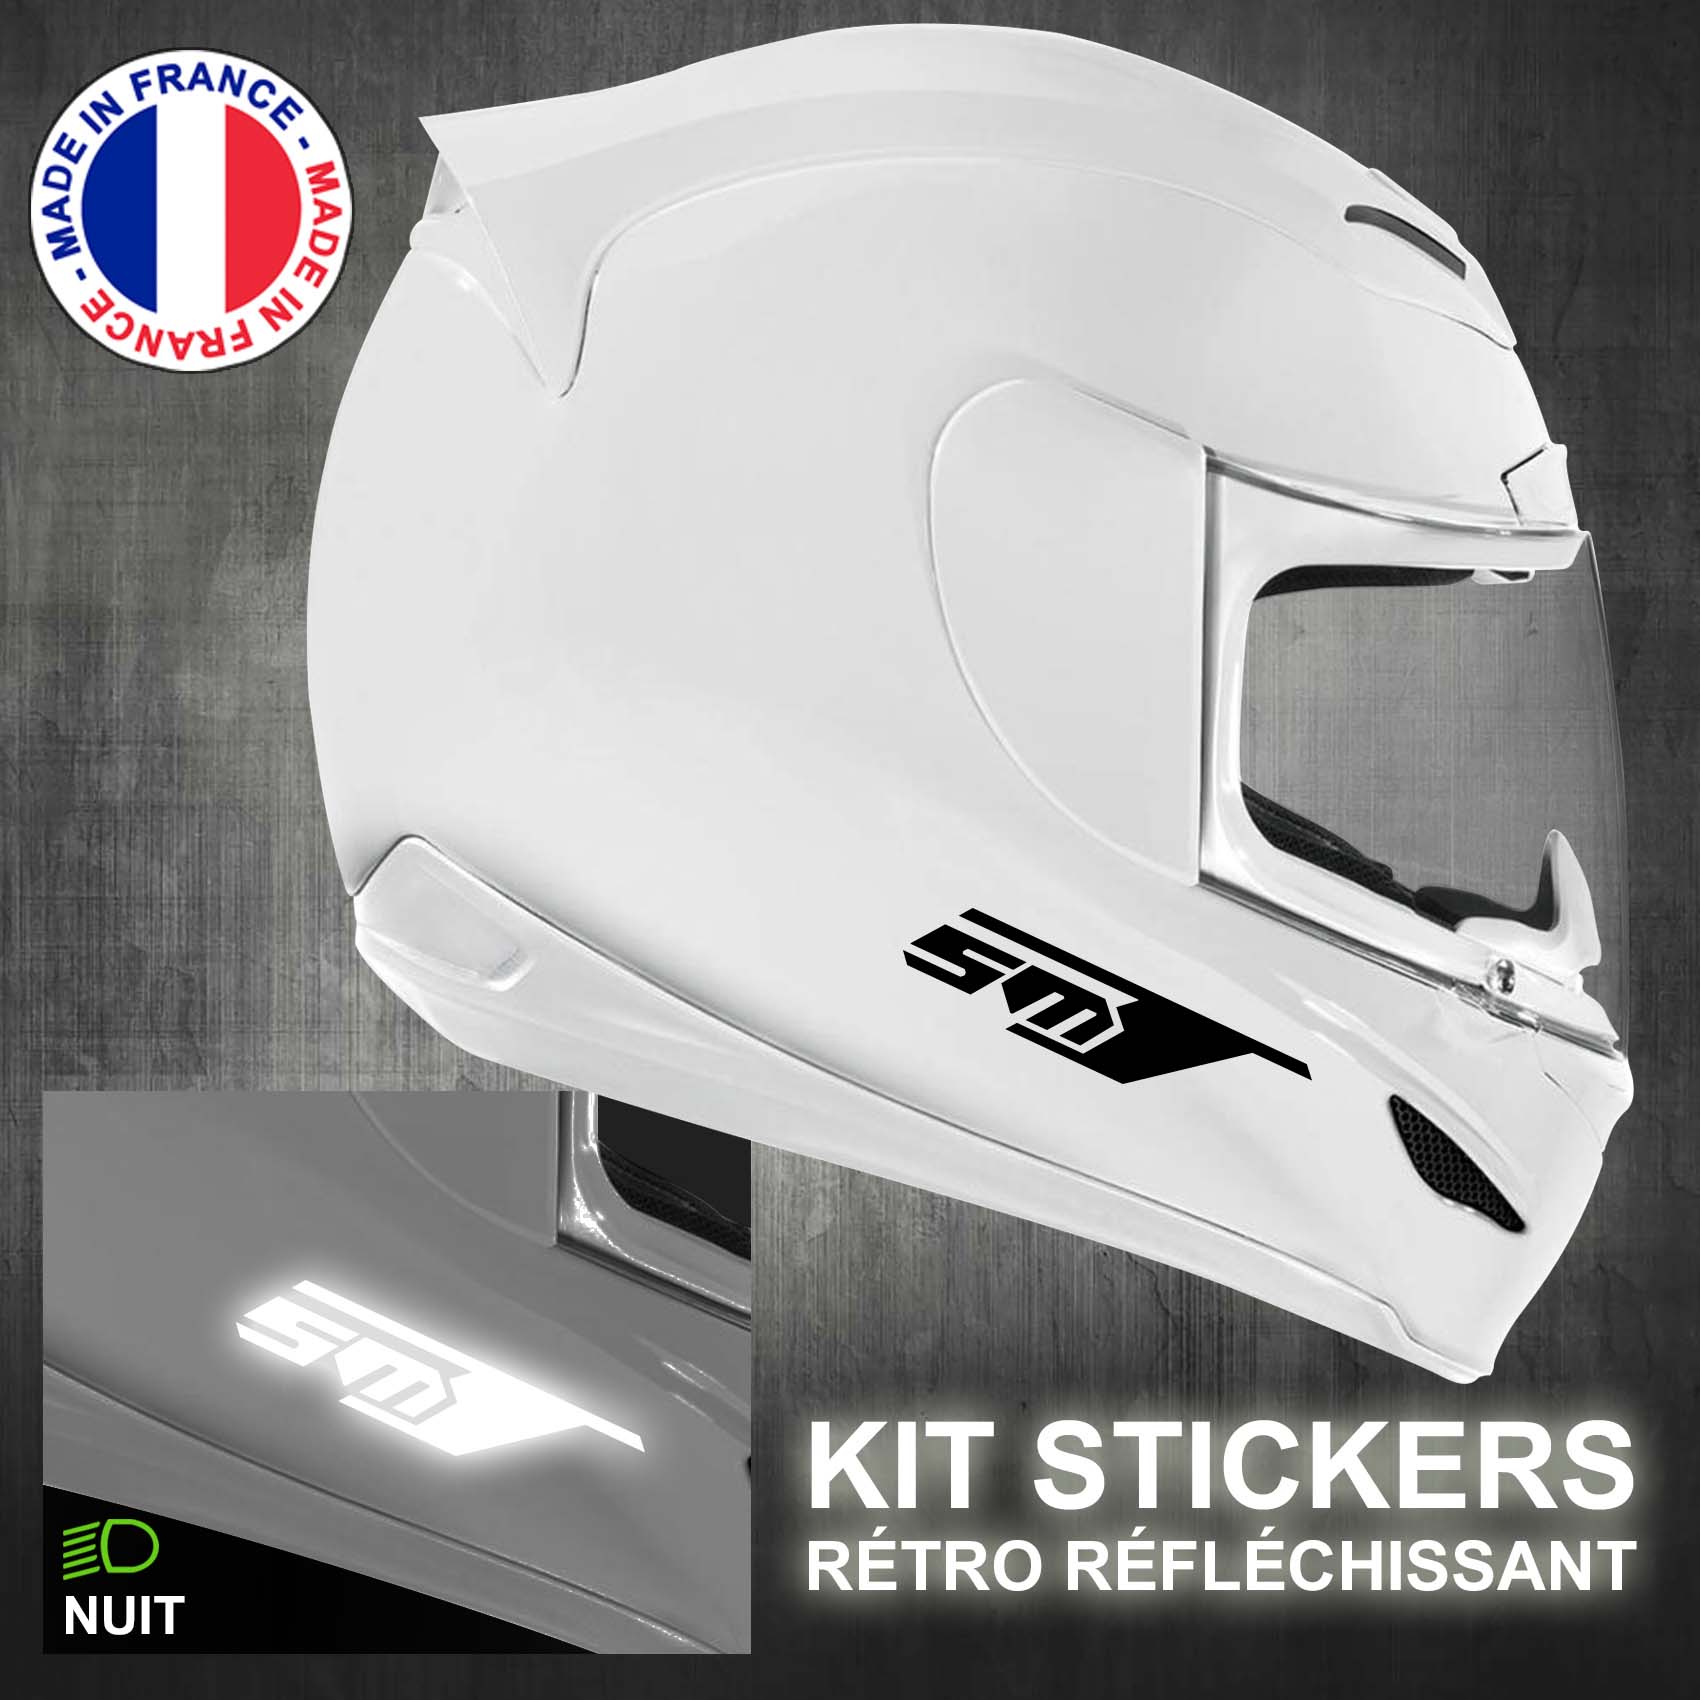 stickers-casque-moto-ktm-smt-ref4-retro-reflechissant-blanc-autocollant-moto-velo-tuning-racing-route-sticker-casques-adhesif-scooter-nuit-securite-decals-personnalise-personnalisable-min